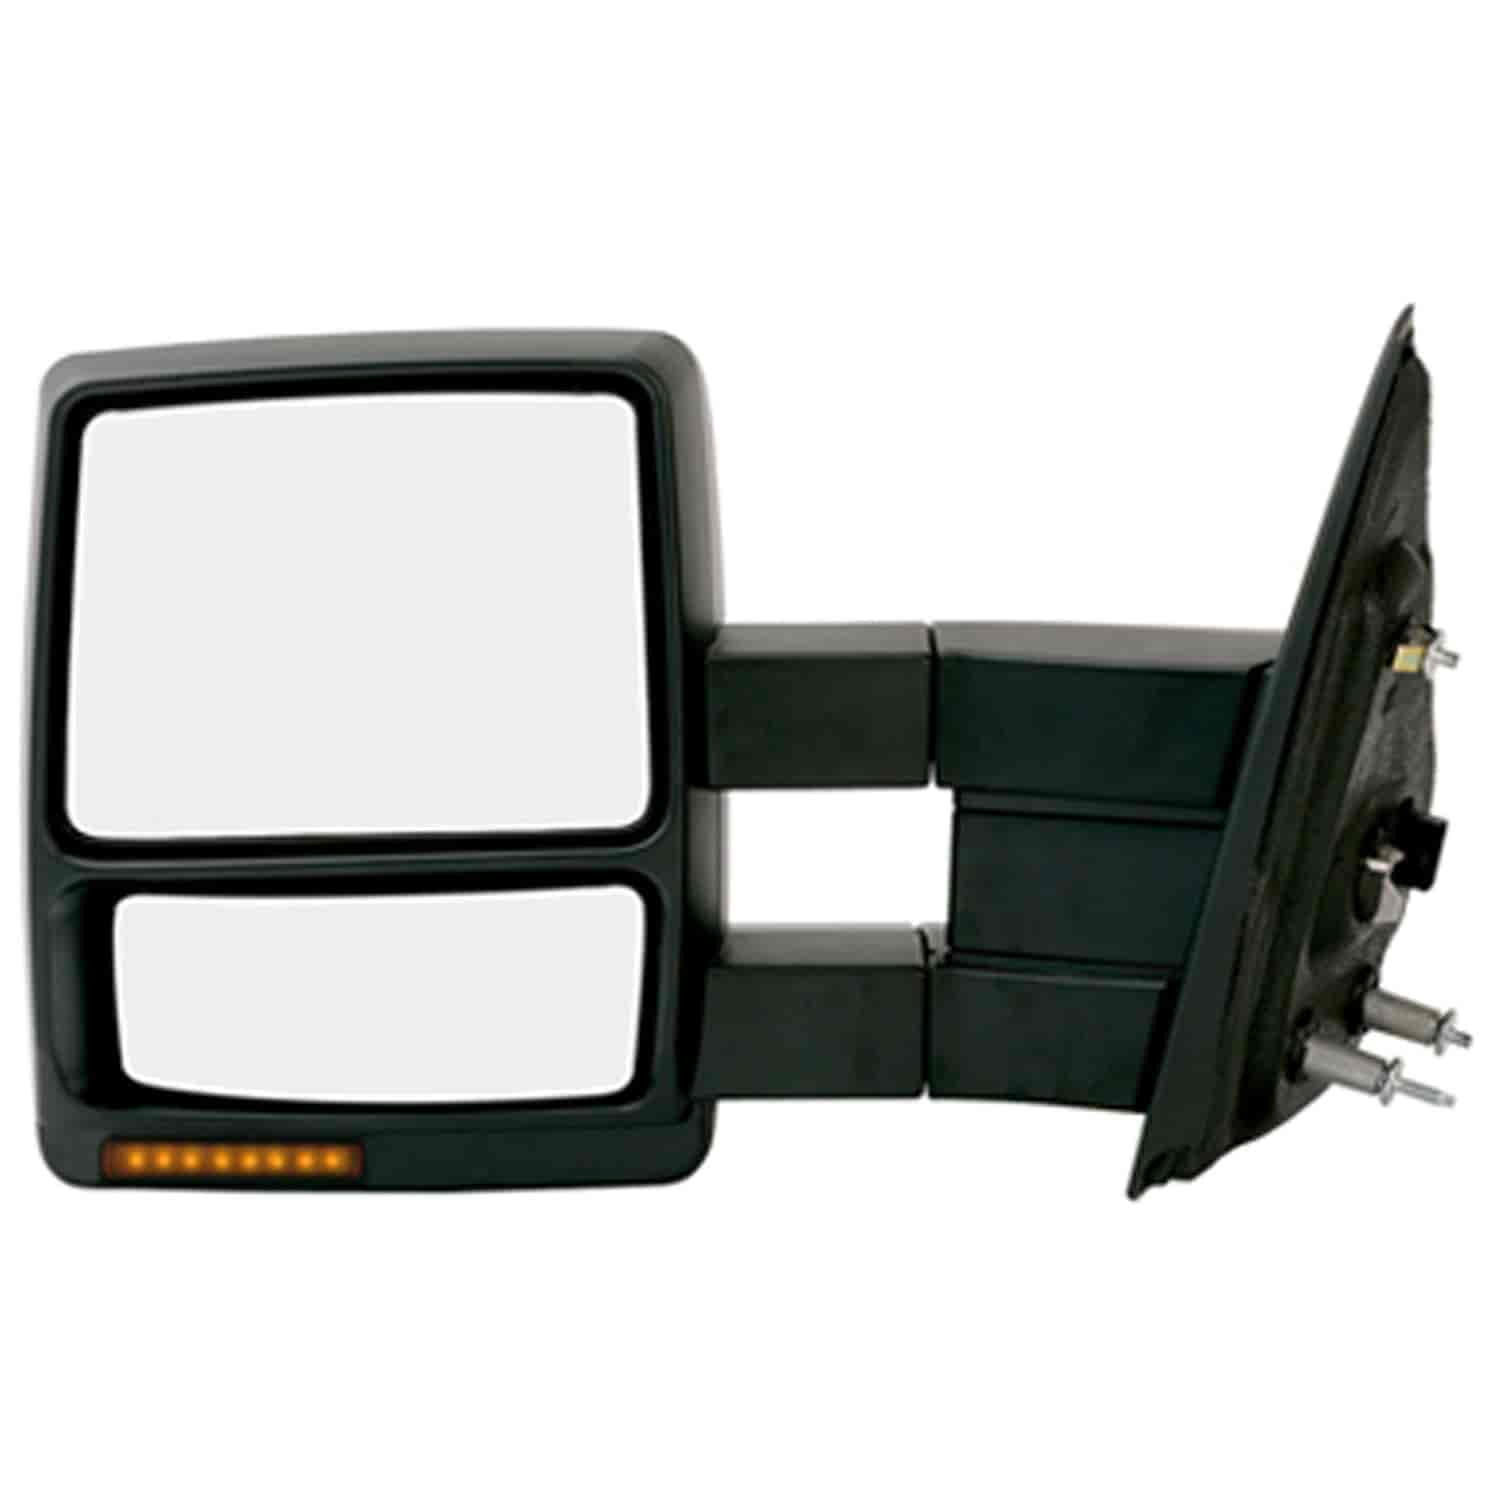 OEM Style Replacement Mirror Fits 2009 to 2012